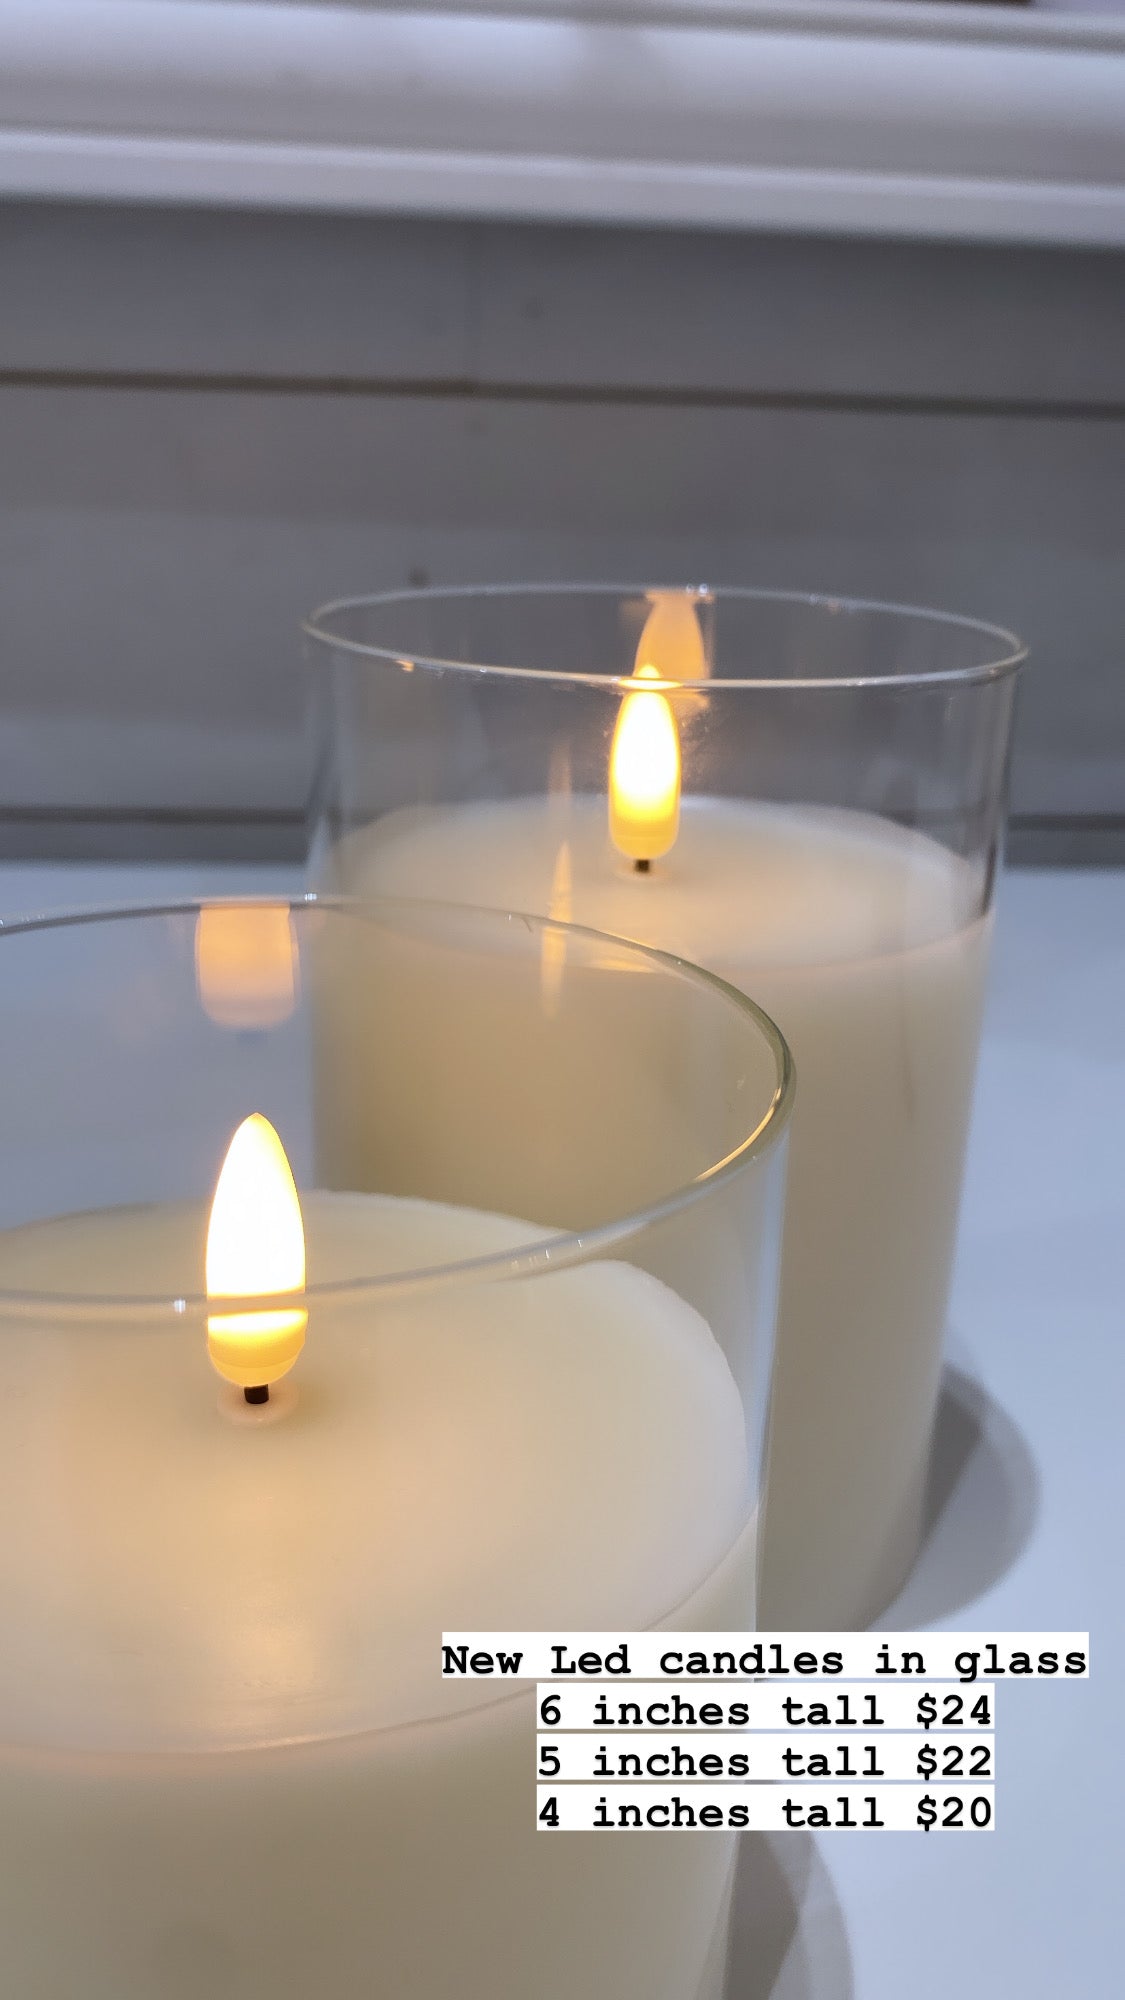 LED Candles in Glass, 3 sizes